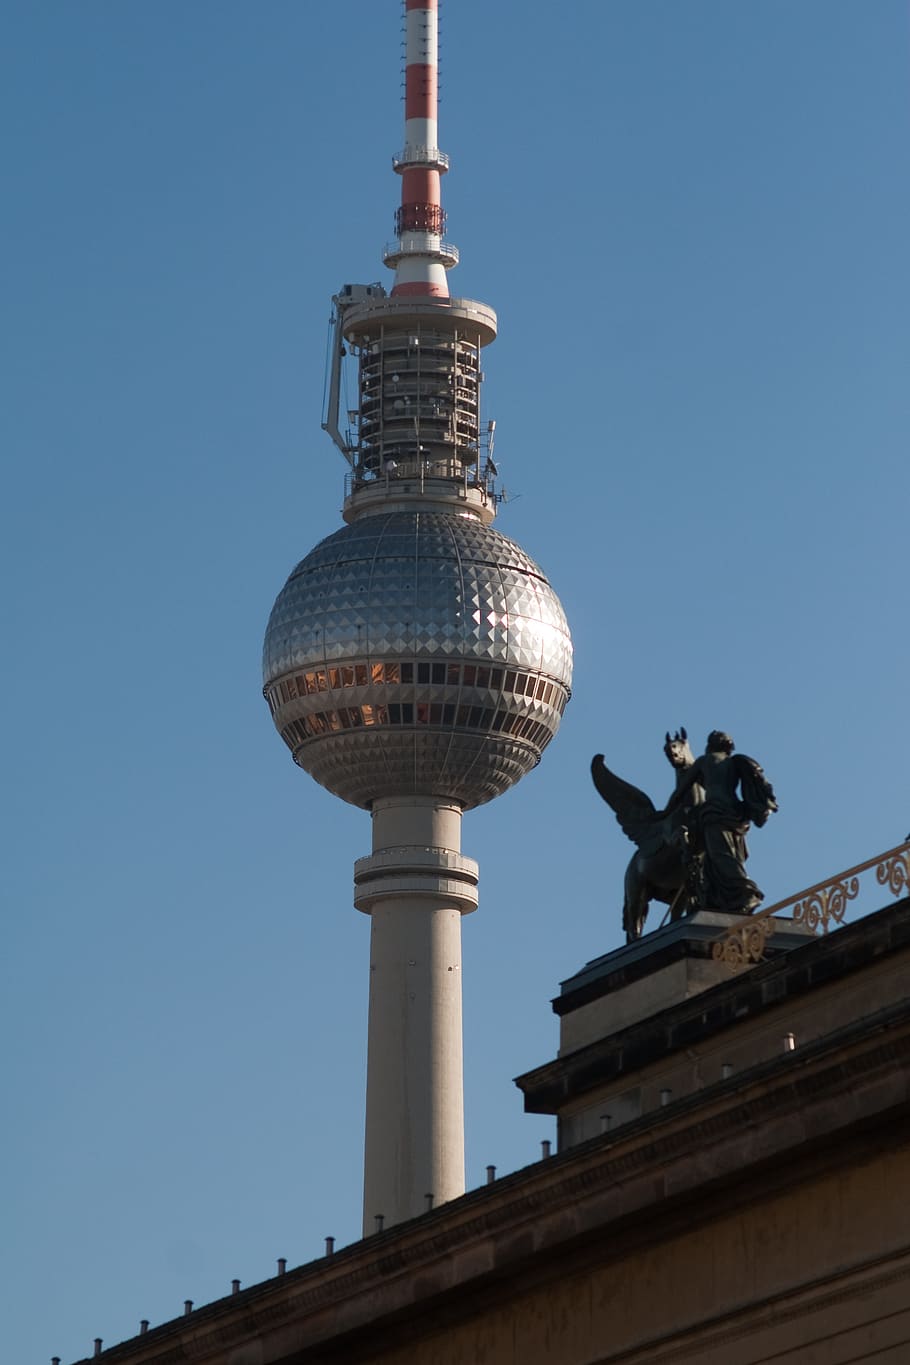 hotels in berlin, germany, tv tower, nearby, statue, architecture, built structure, sky, building exterior, low angle view